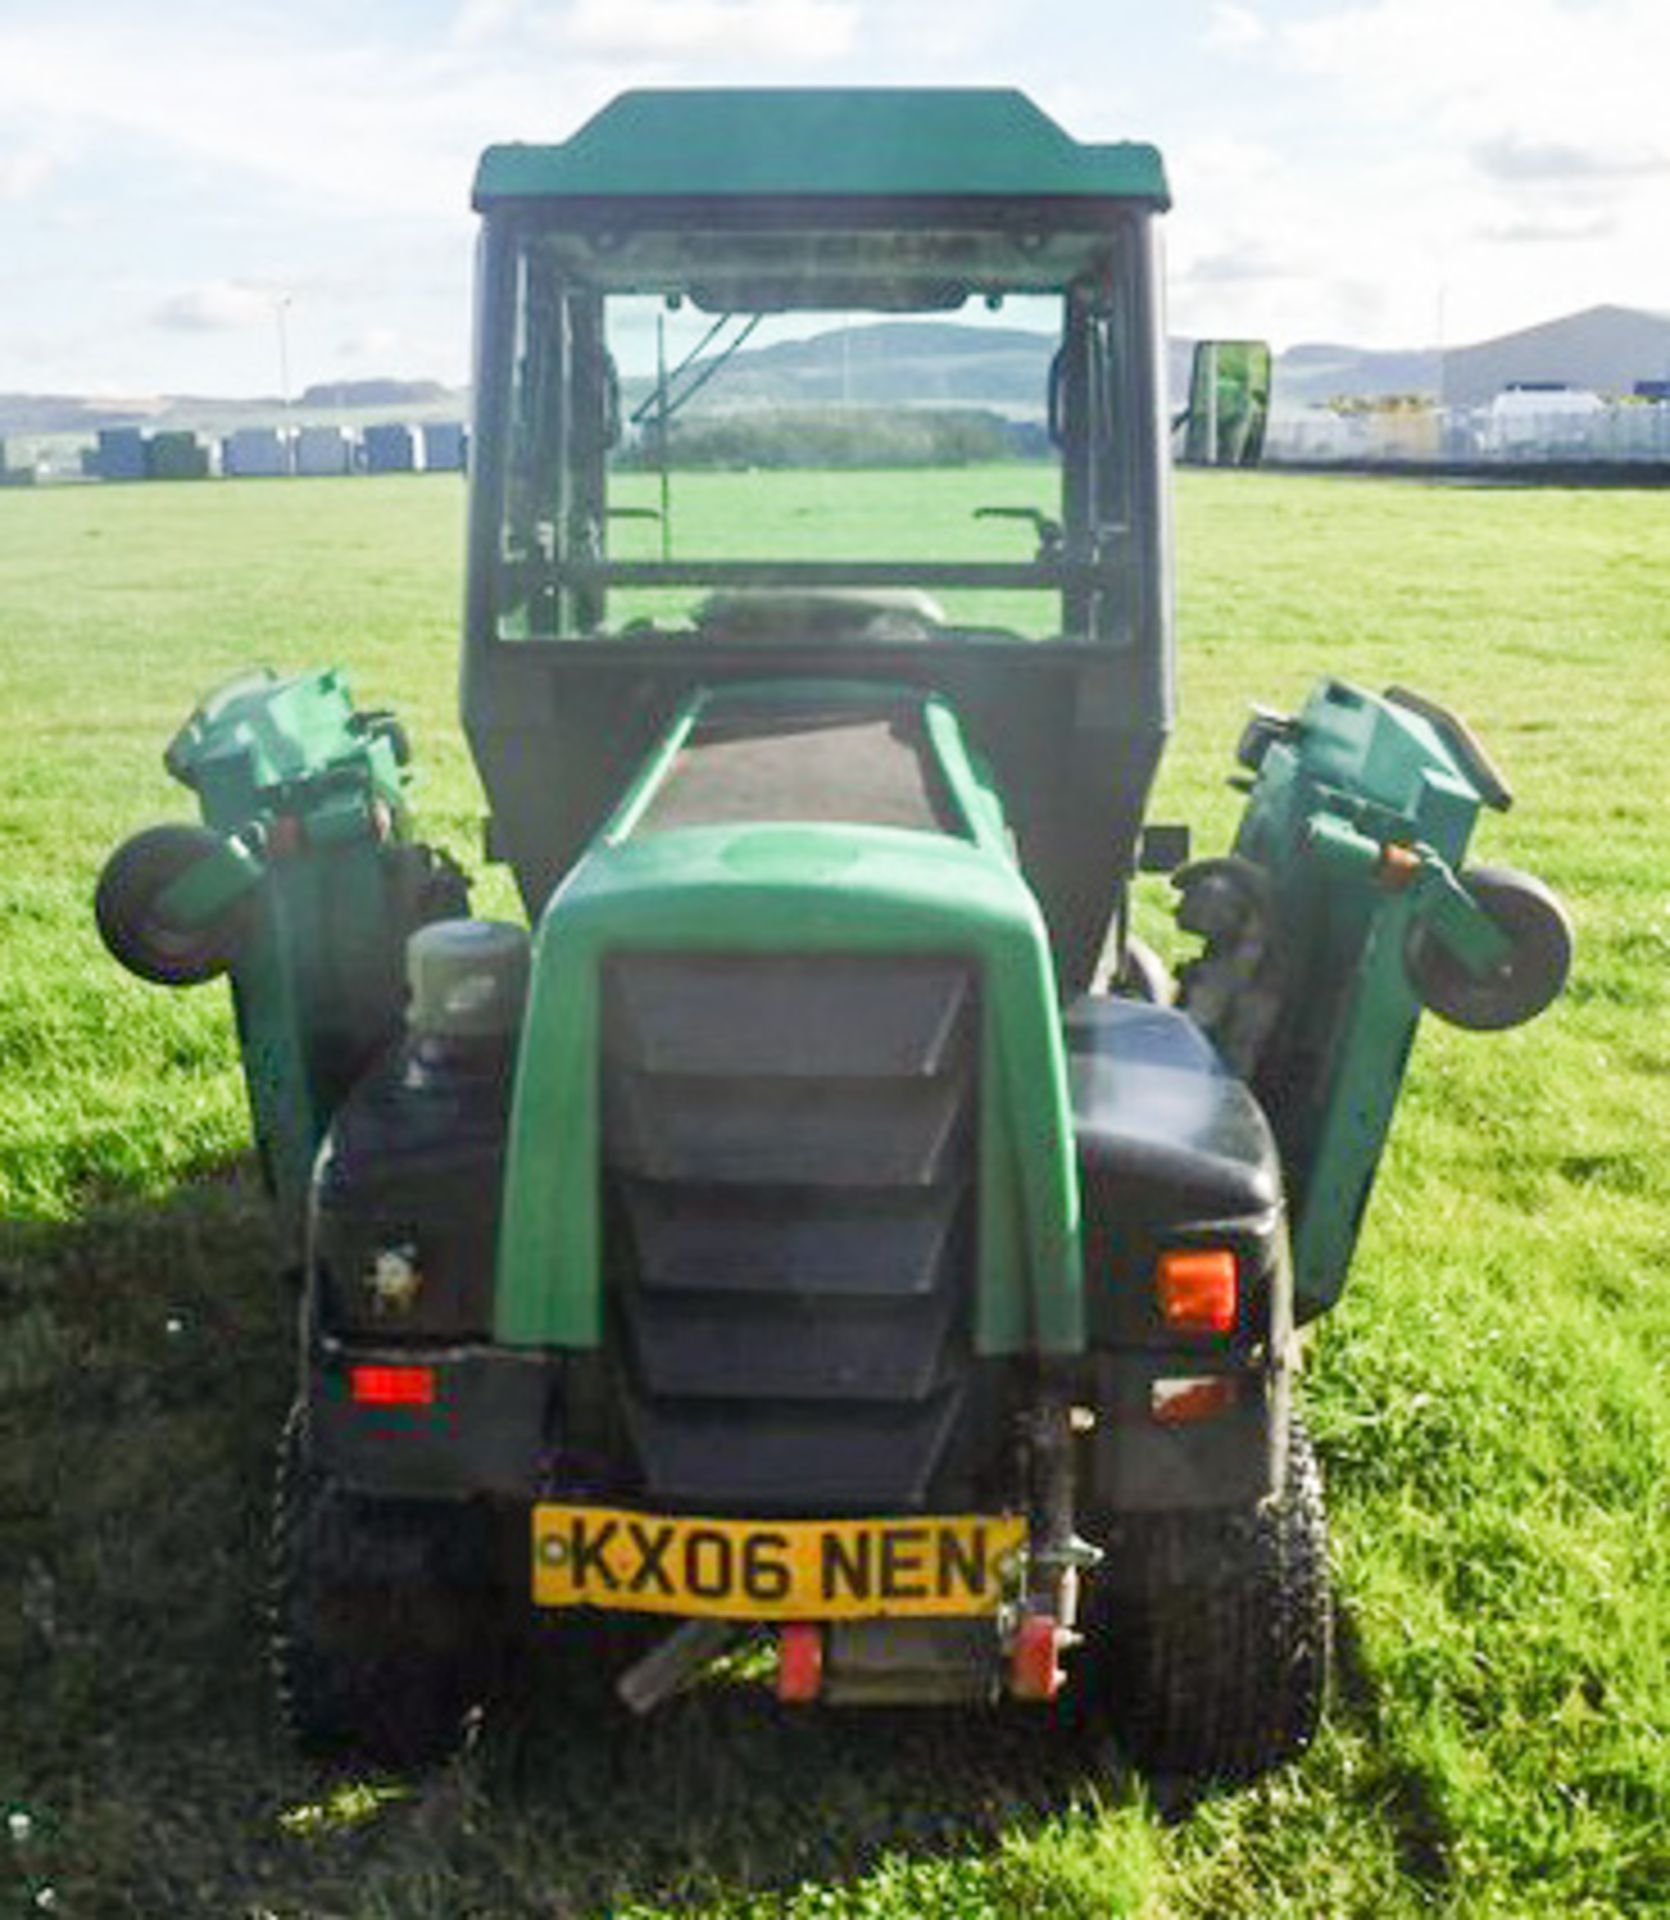 2006 RANSOME HF6010 BATWING ROTARY MOWER, CUTS APPROX 10FT 6INCHS, PERKINS 6 CYLINDER ENGINE, REG KX - Image 11 of 14